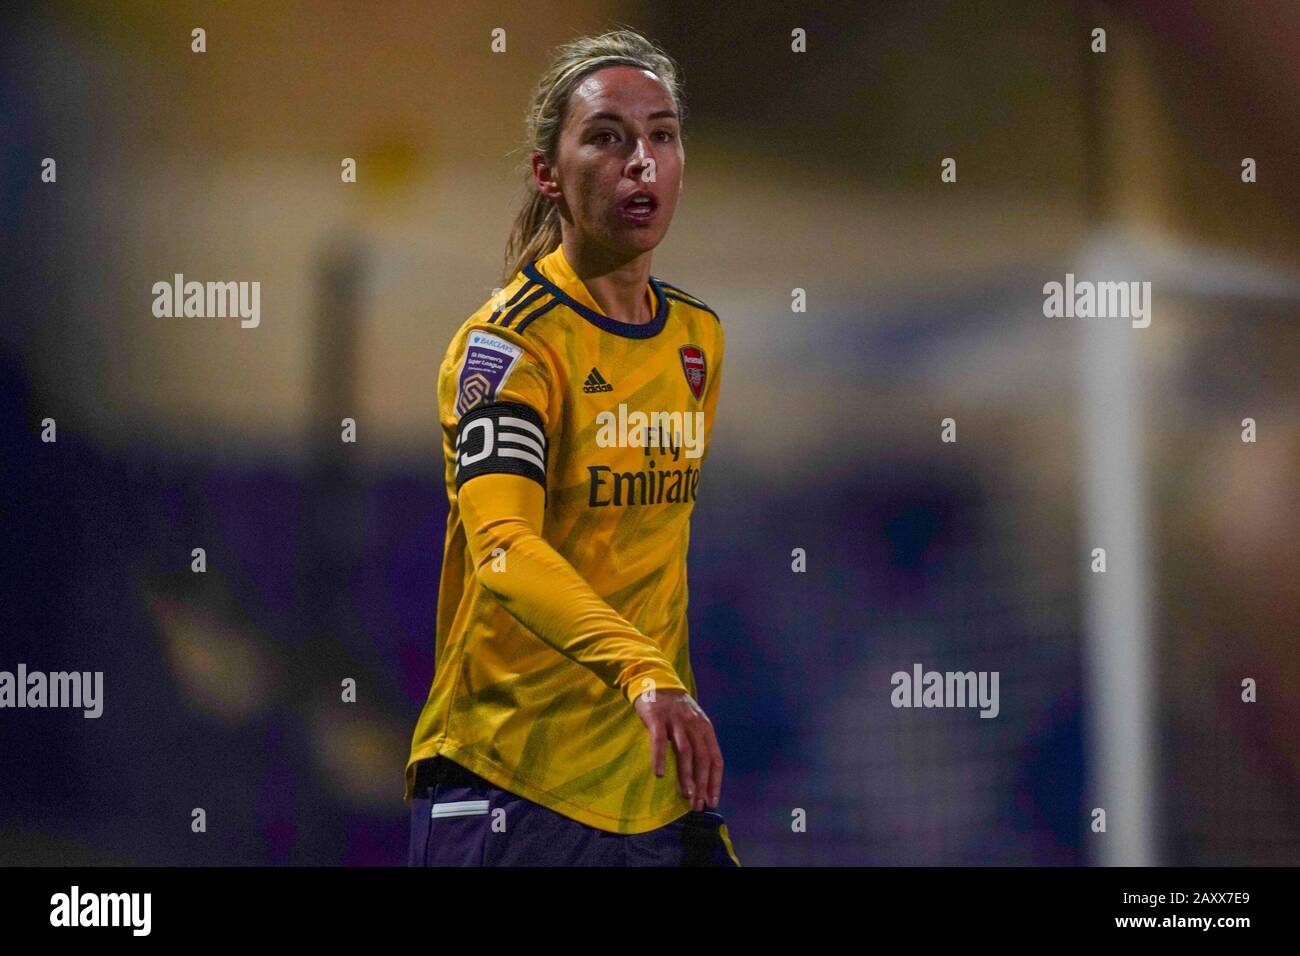 CHESTER. ENGLAND. FEB 13th: Jordan Nobbs of Arsenal in action  during the Women’s Super League game between Liverpool Women and Arsenal Women at The Deva Stadium in Chester, England. (Photo by Daniela Porcelli/SPP) Stock Photo